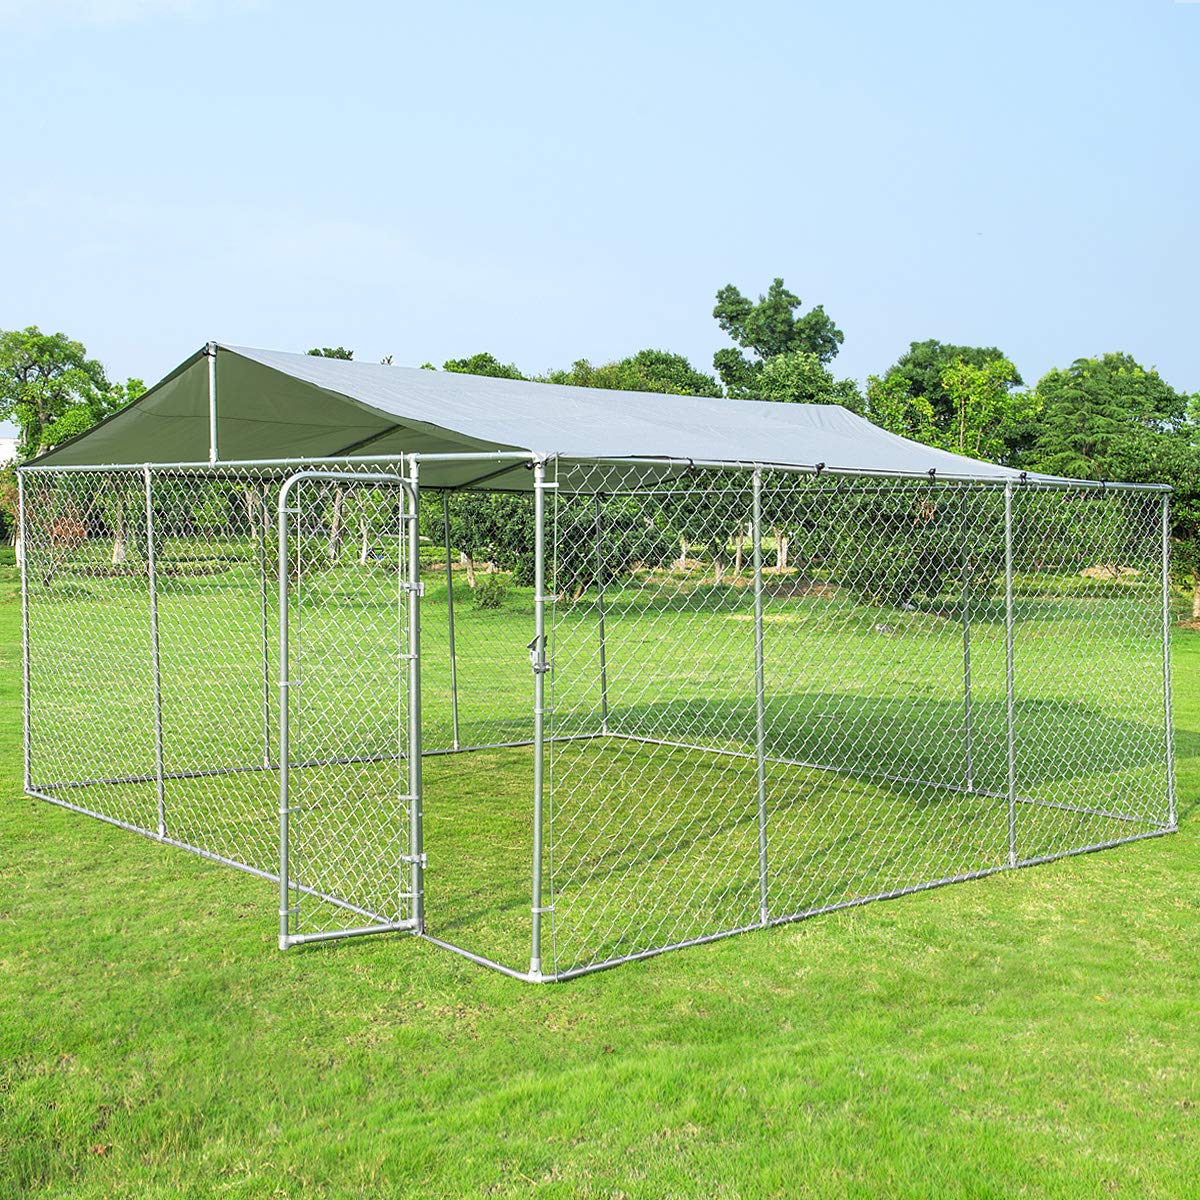 Giantex Large Outdoor Dog Kennel with Shade Roof Cover